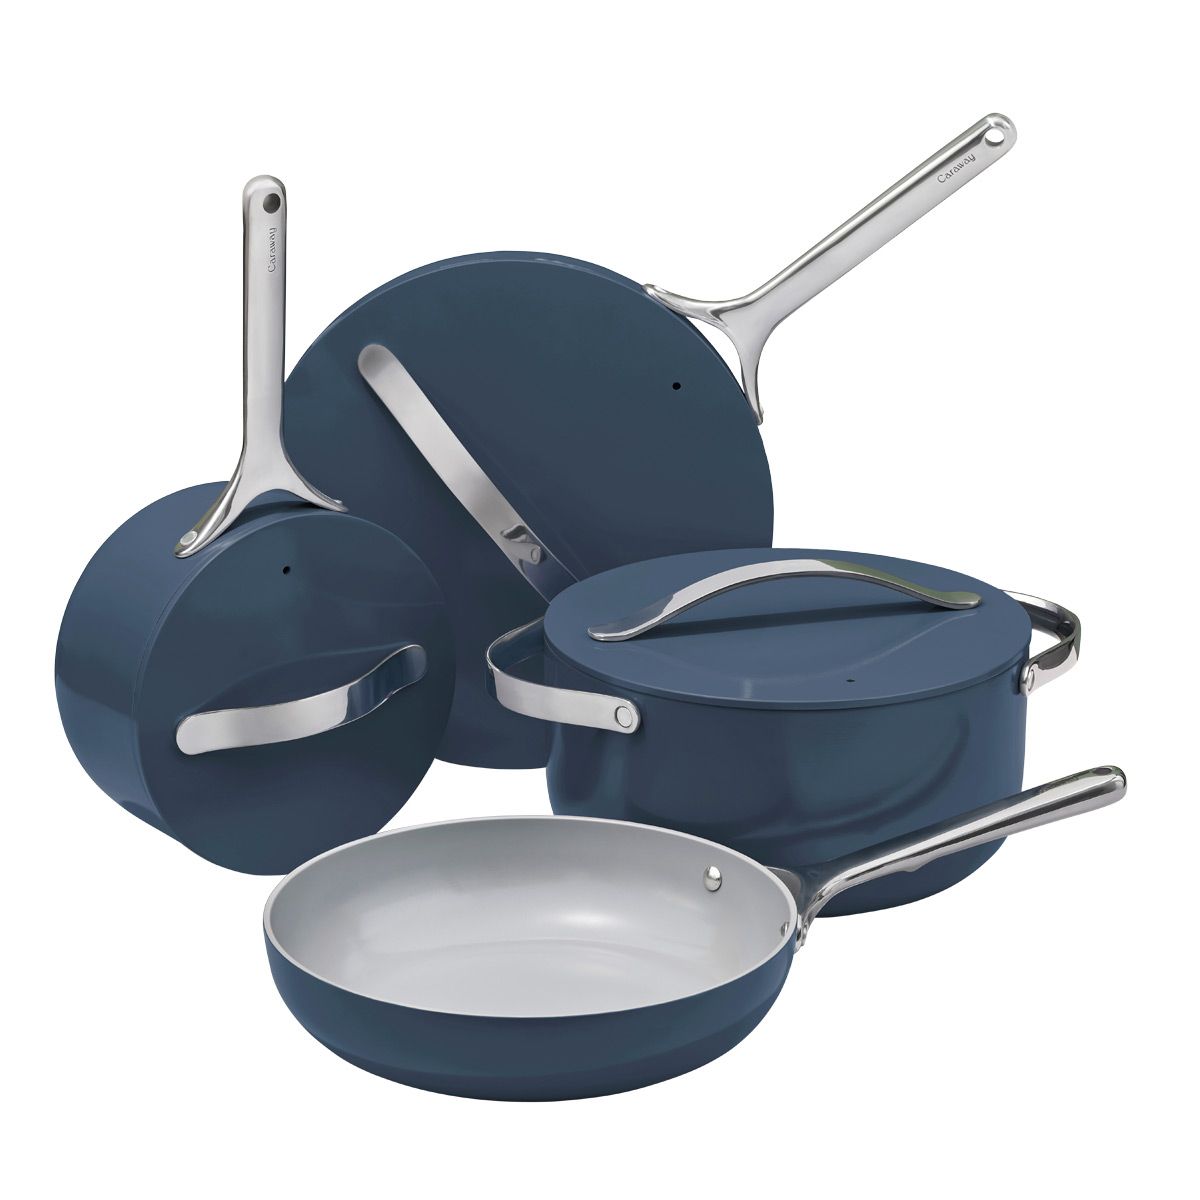 Caraway Home Non-Toxic Non-Stick Ceramic 12-Piece Cookware Set | The Container Store